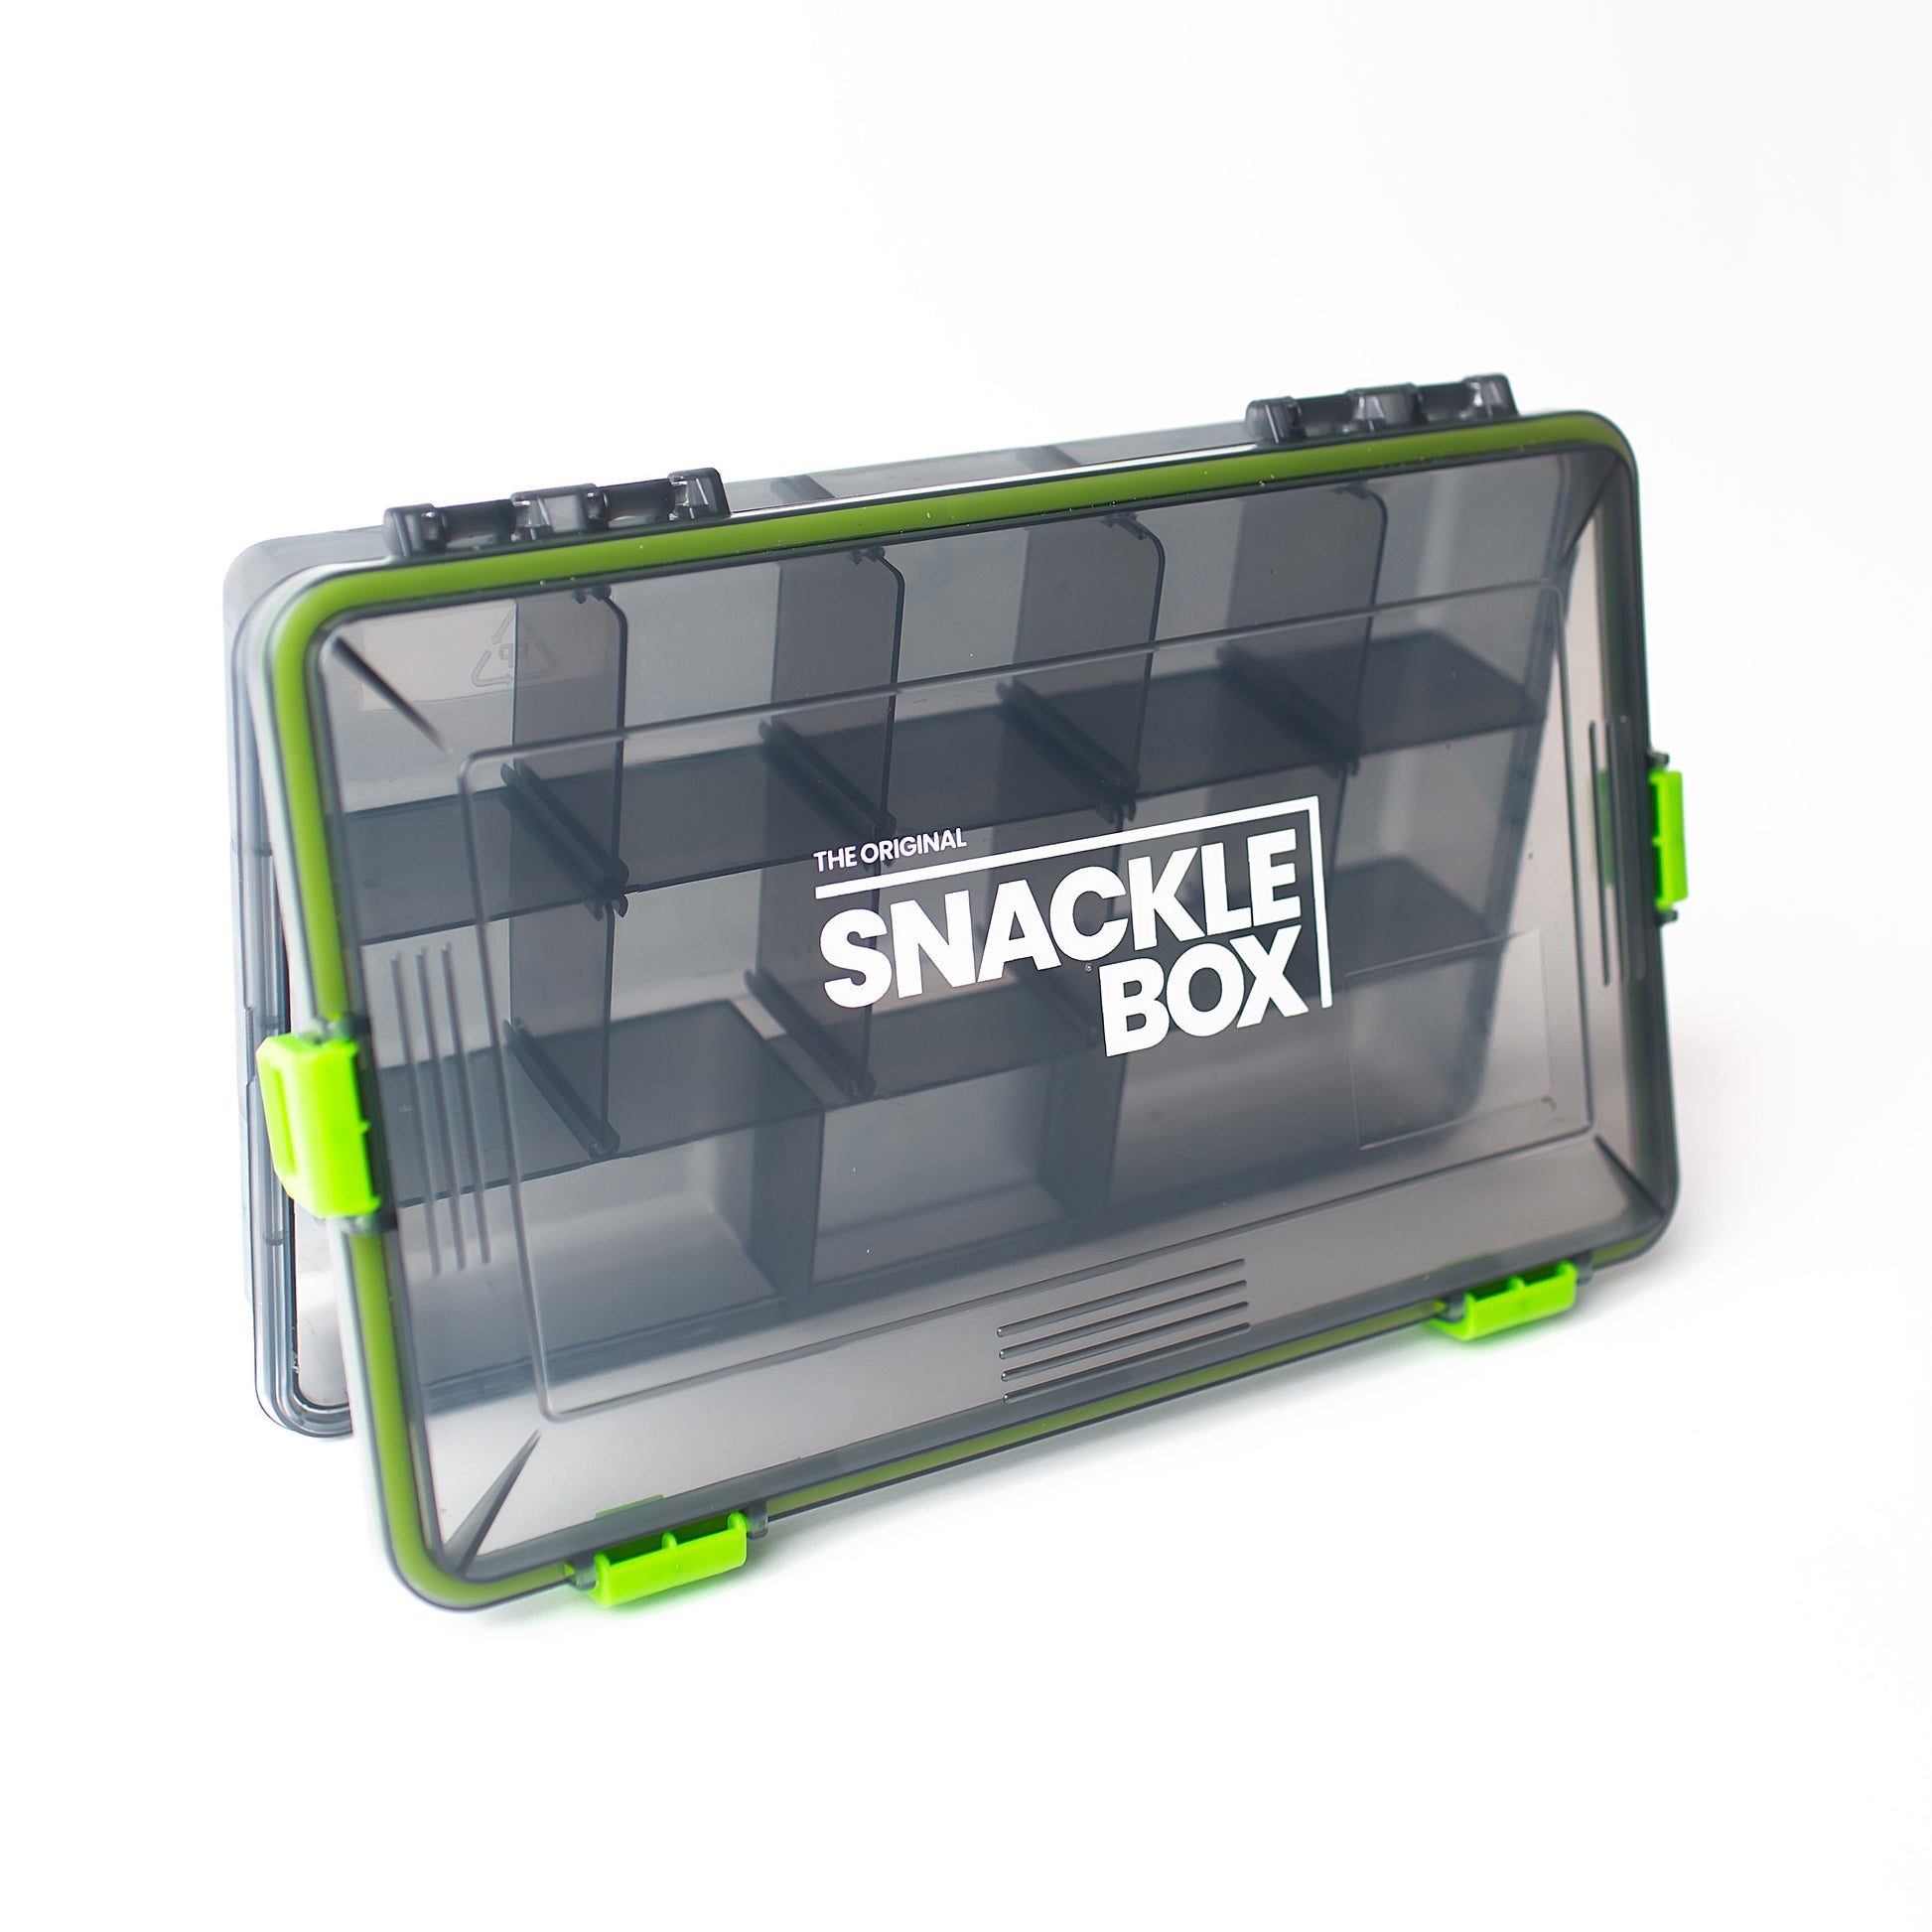 The Snackle Box XL